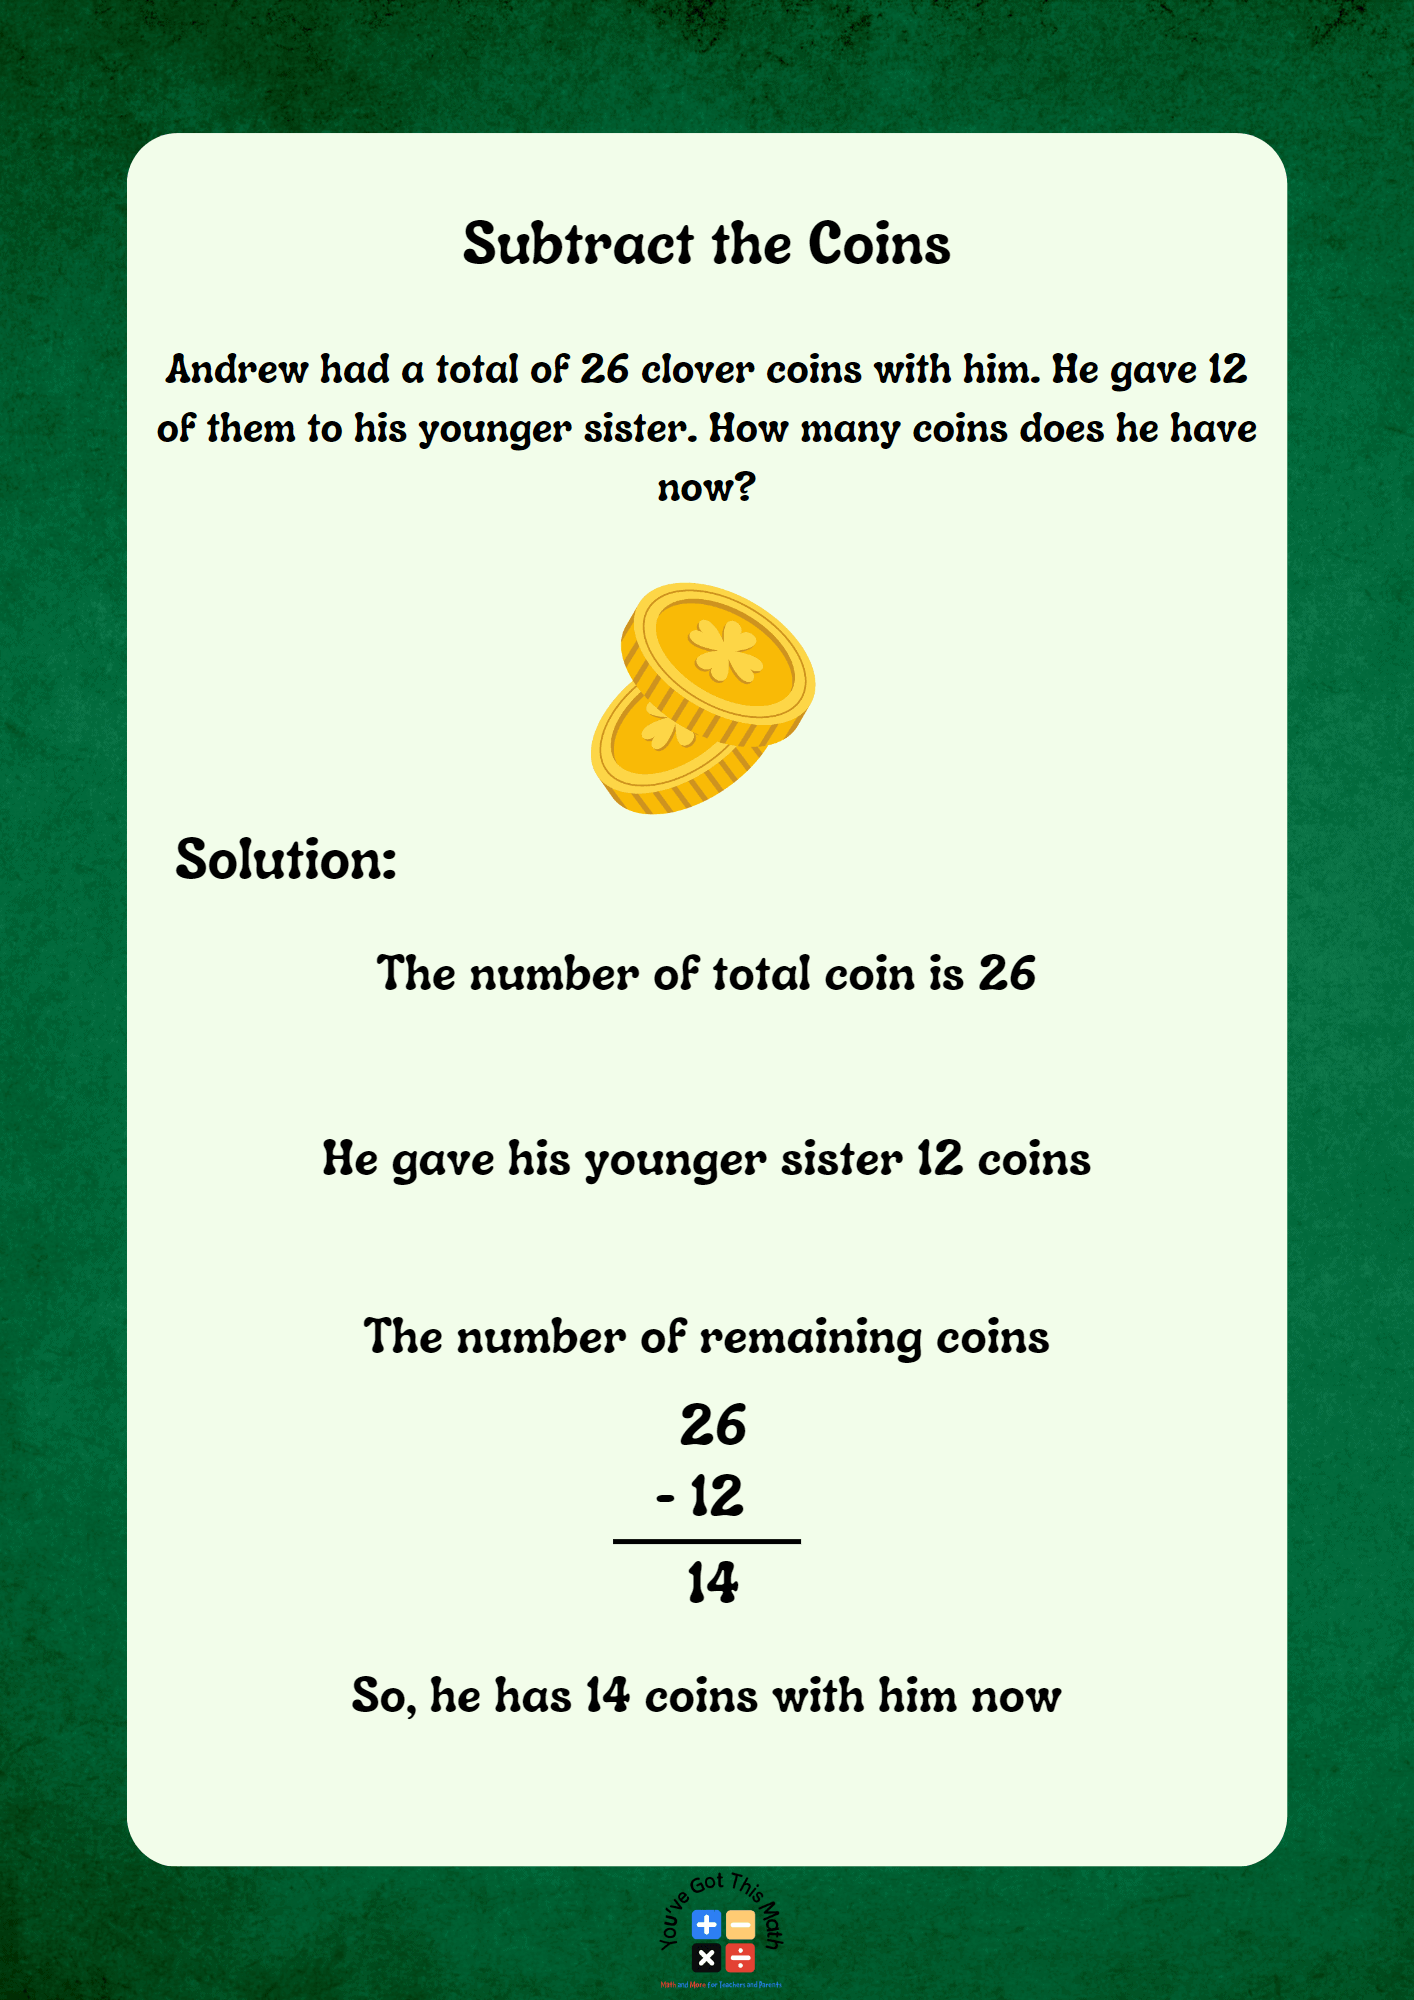 Subtracting Coins as An Example of St Patrick's Day Math Word Problems